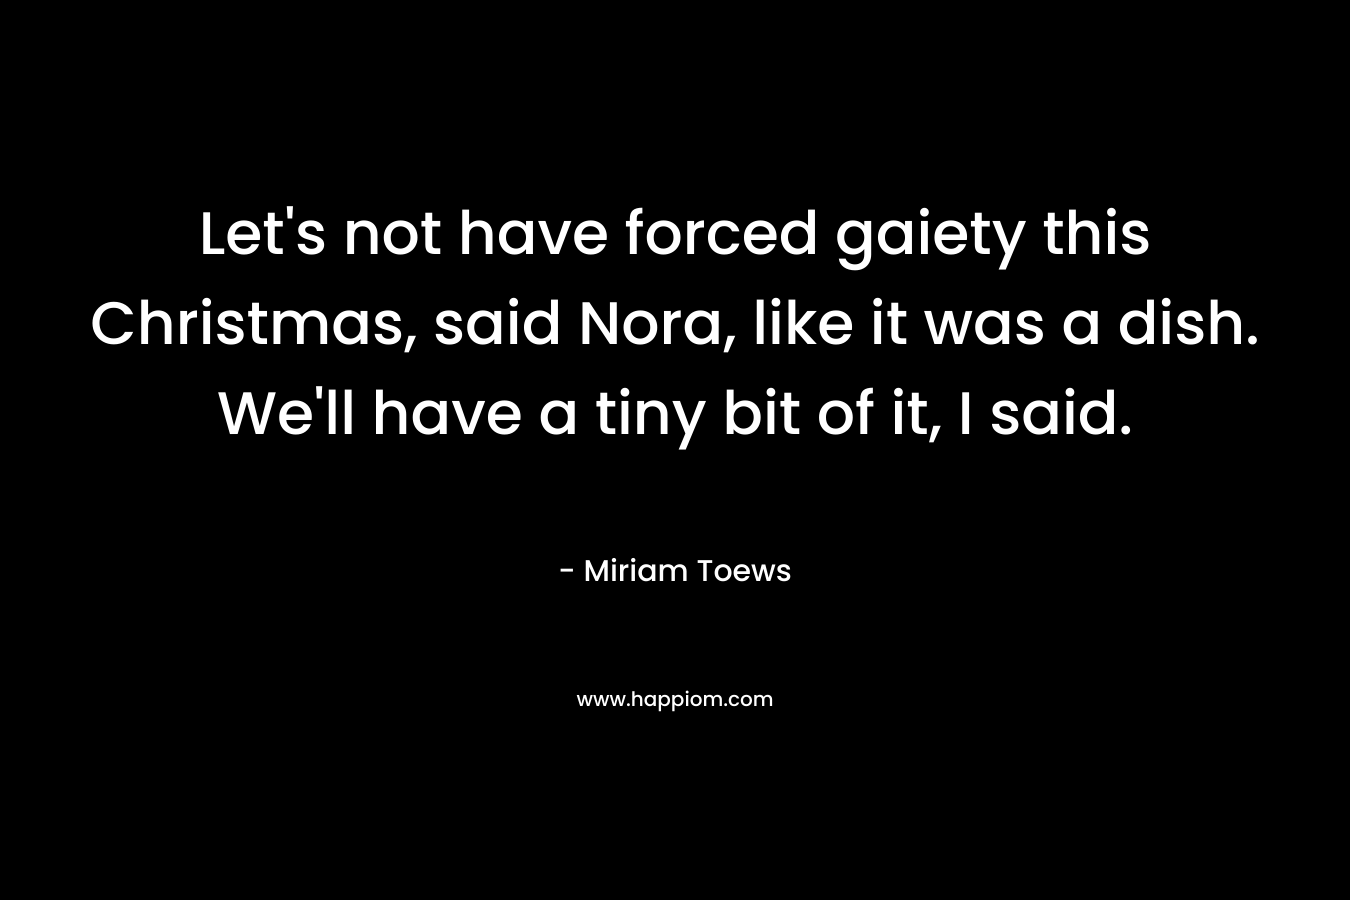 Let's not have forced gaiety this Christmas, said Nora, like it was a dish. We'll have a tiny bit of it, I said.